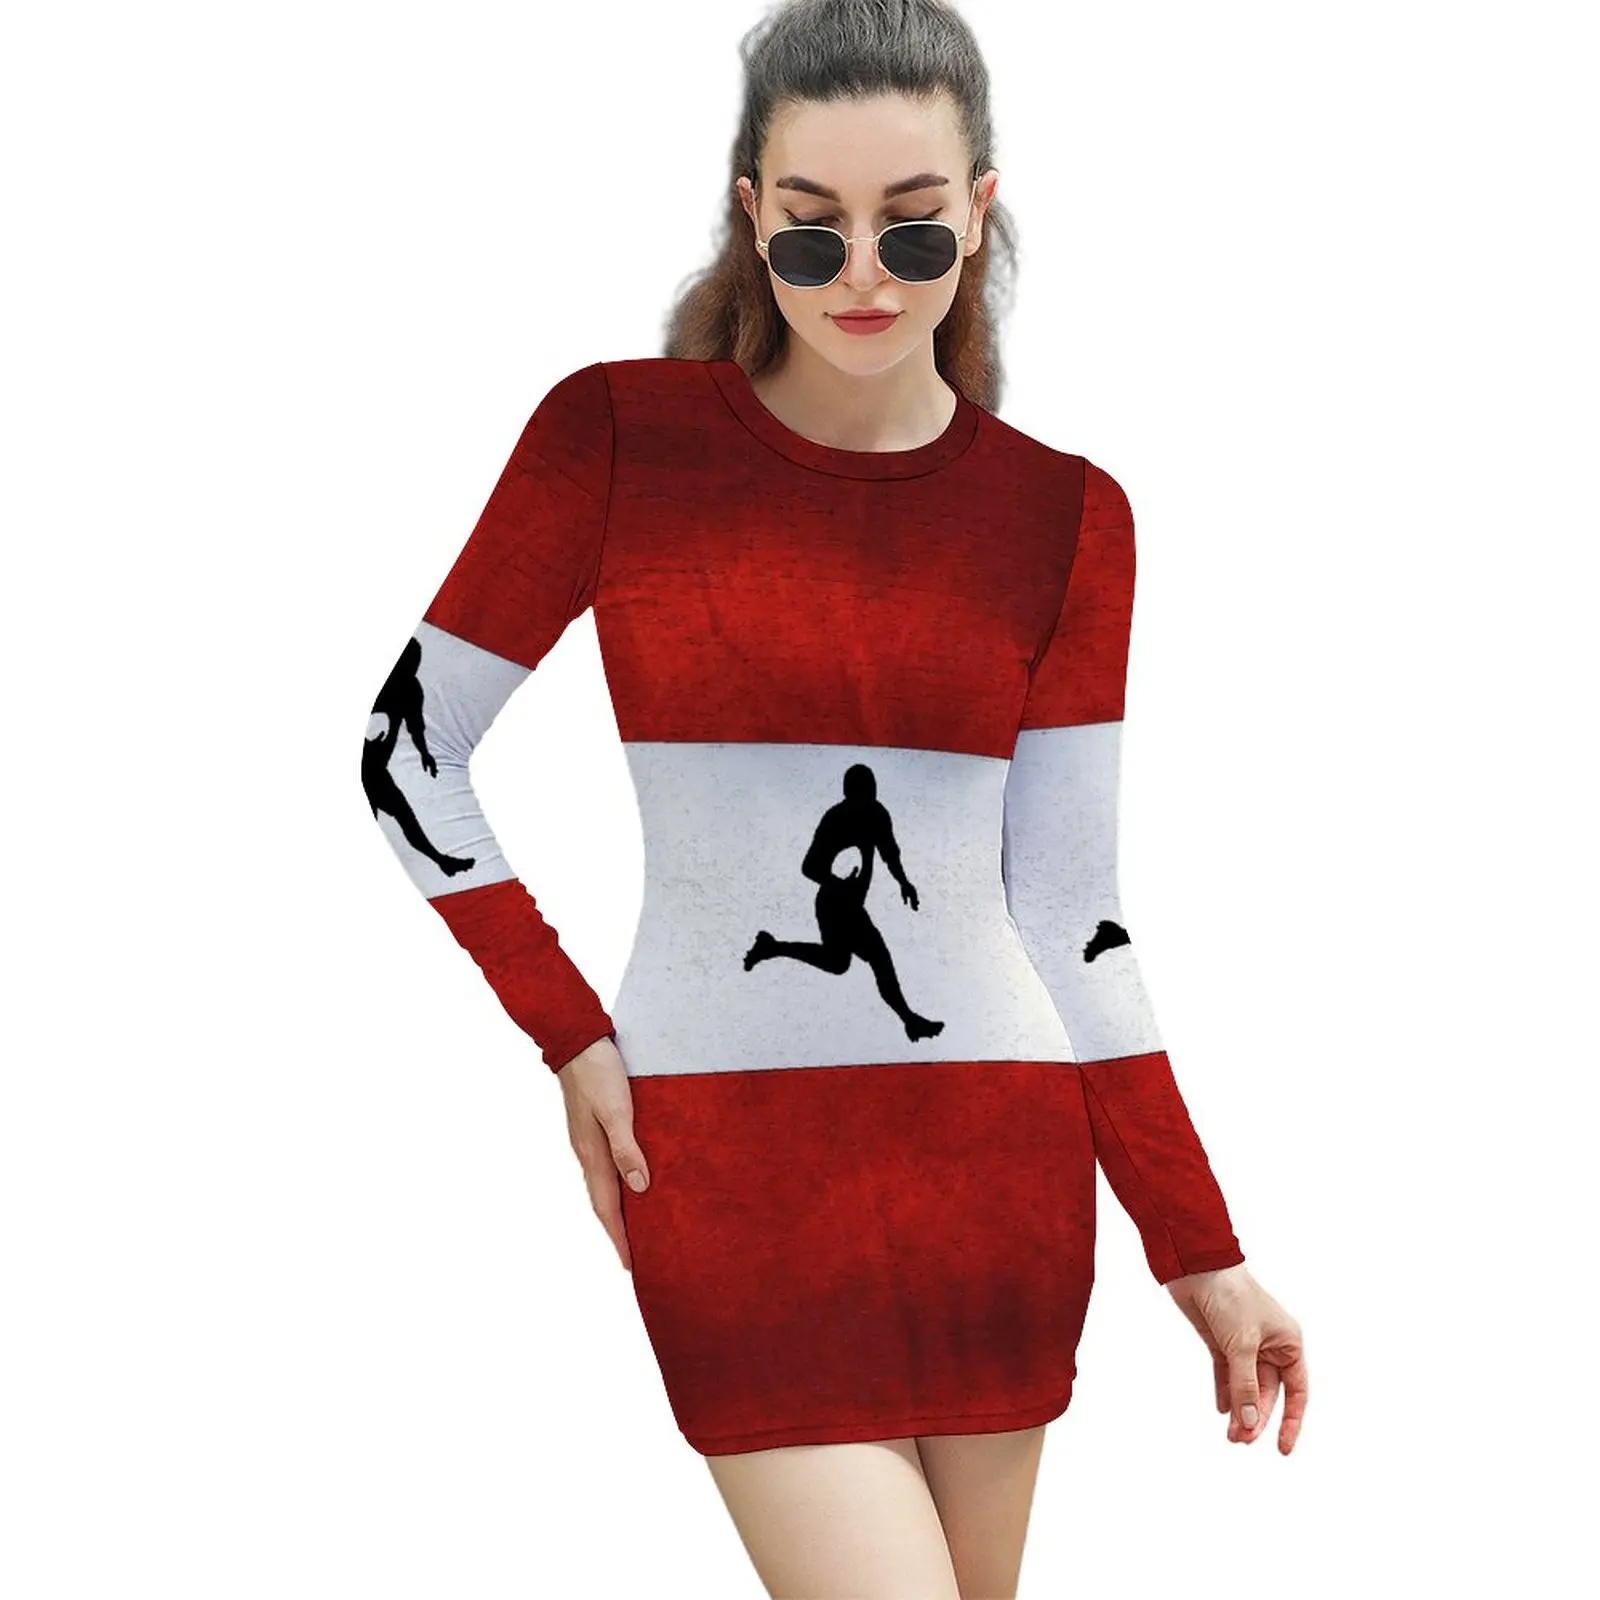 

Sexy Woman's Dress Dress Austrian Rugby Long-sleeved Sheath Dress Vintage Vacations Funny Novelty